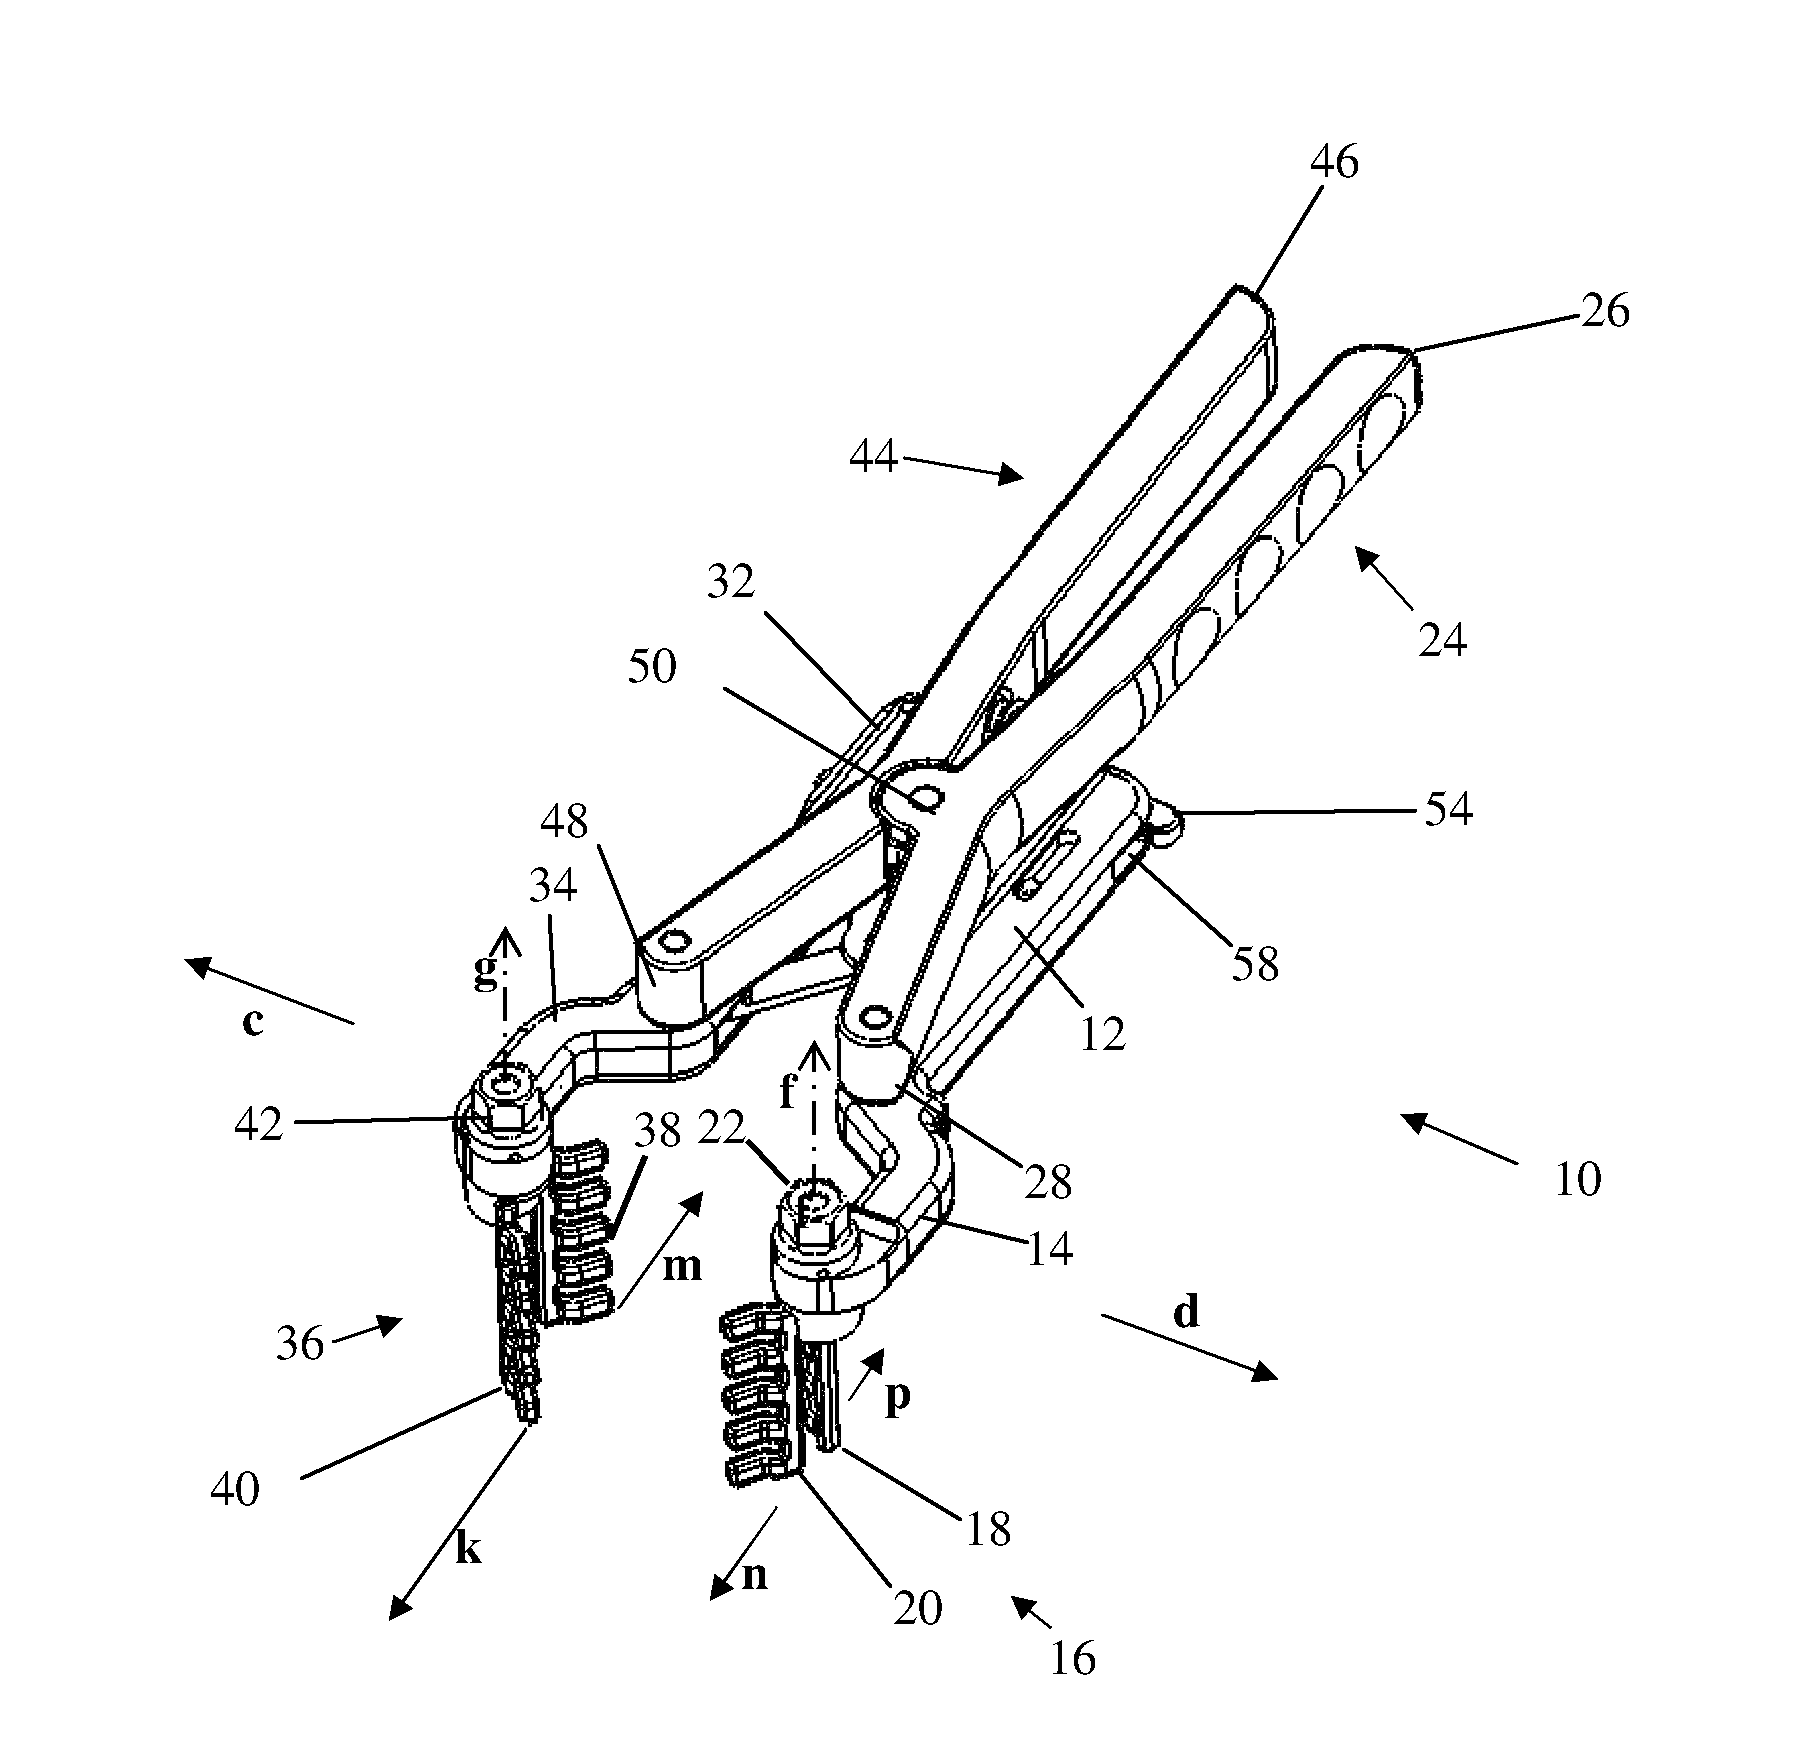 Method of using a surgical tissue retractor